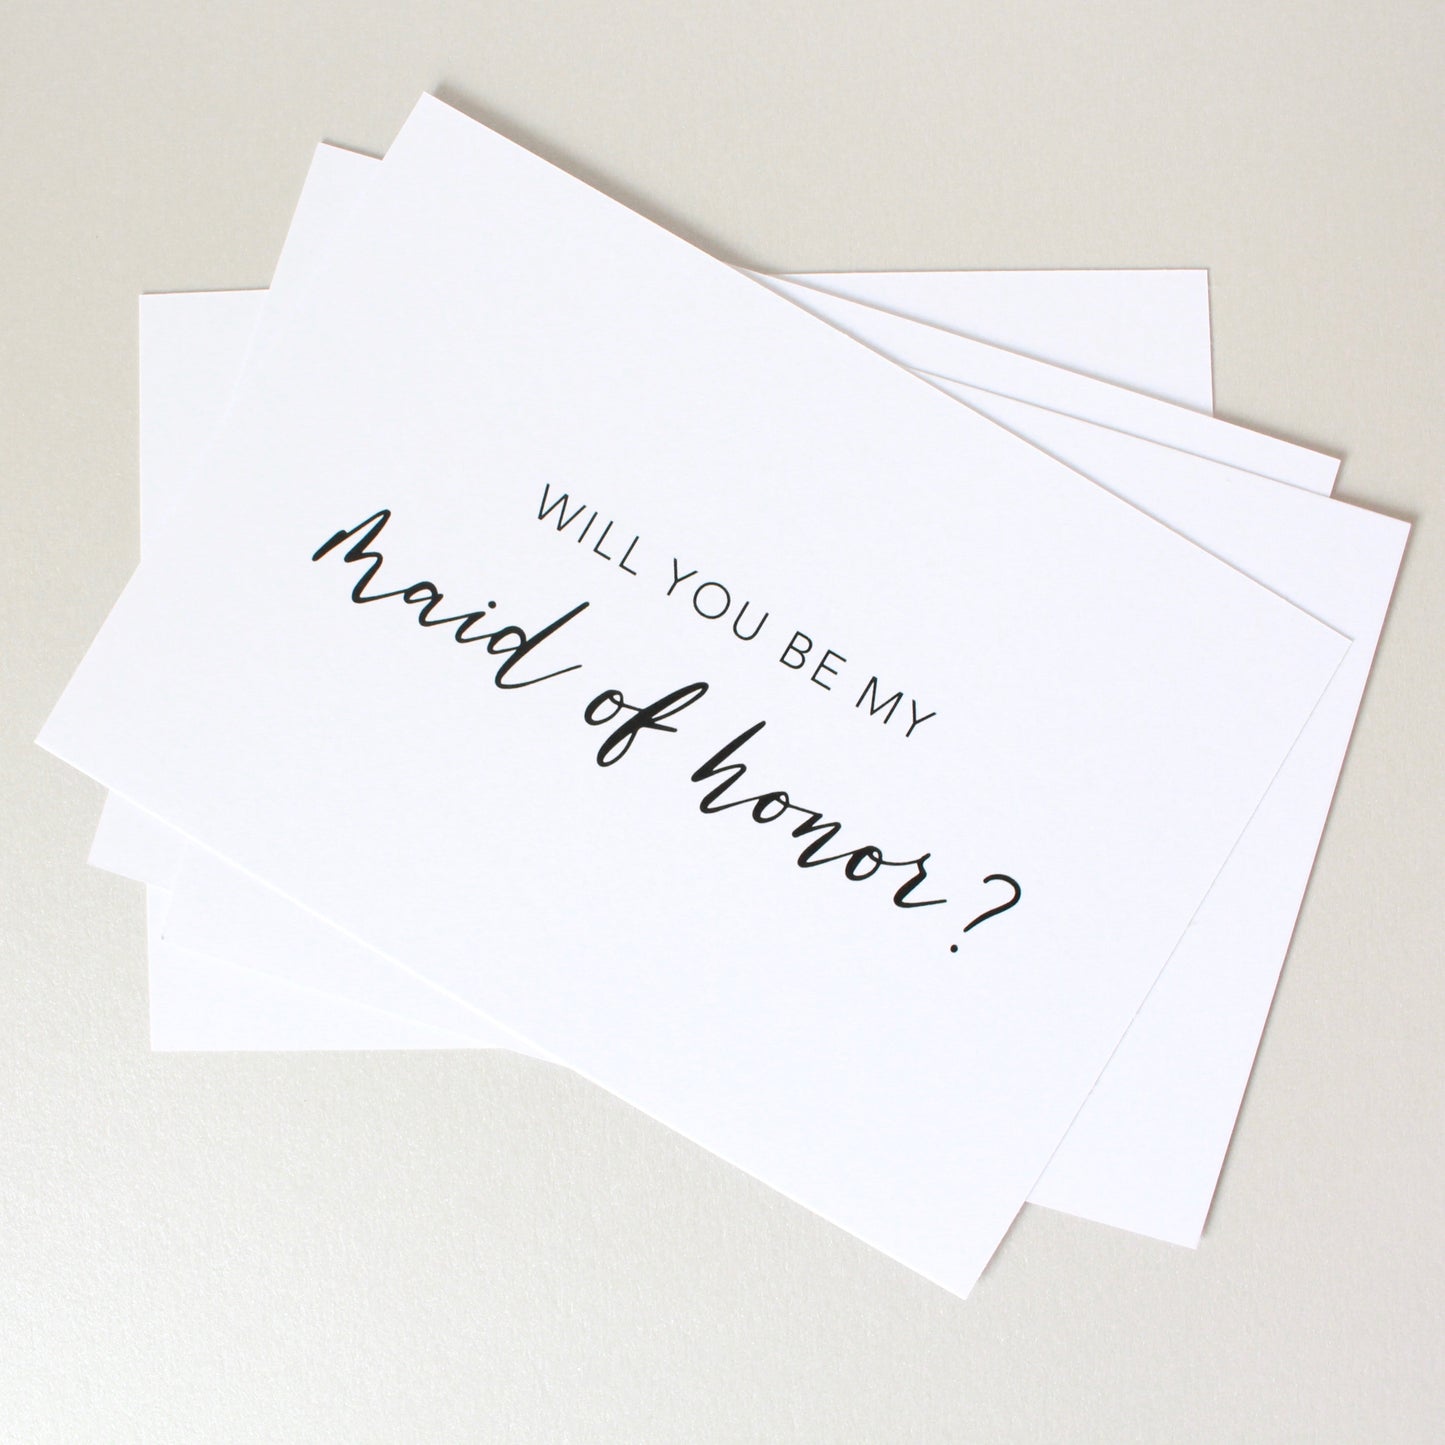 Will You Be My Maid of Honor? Card